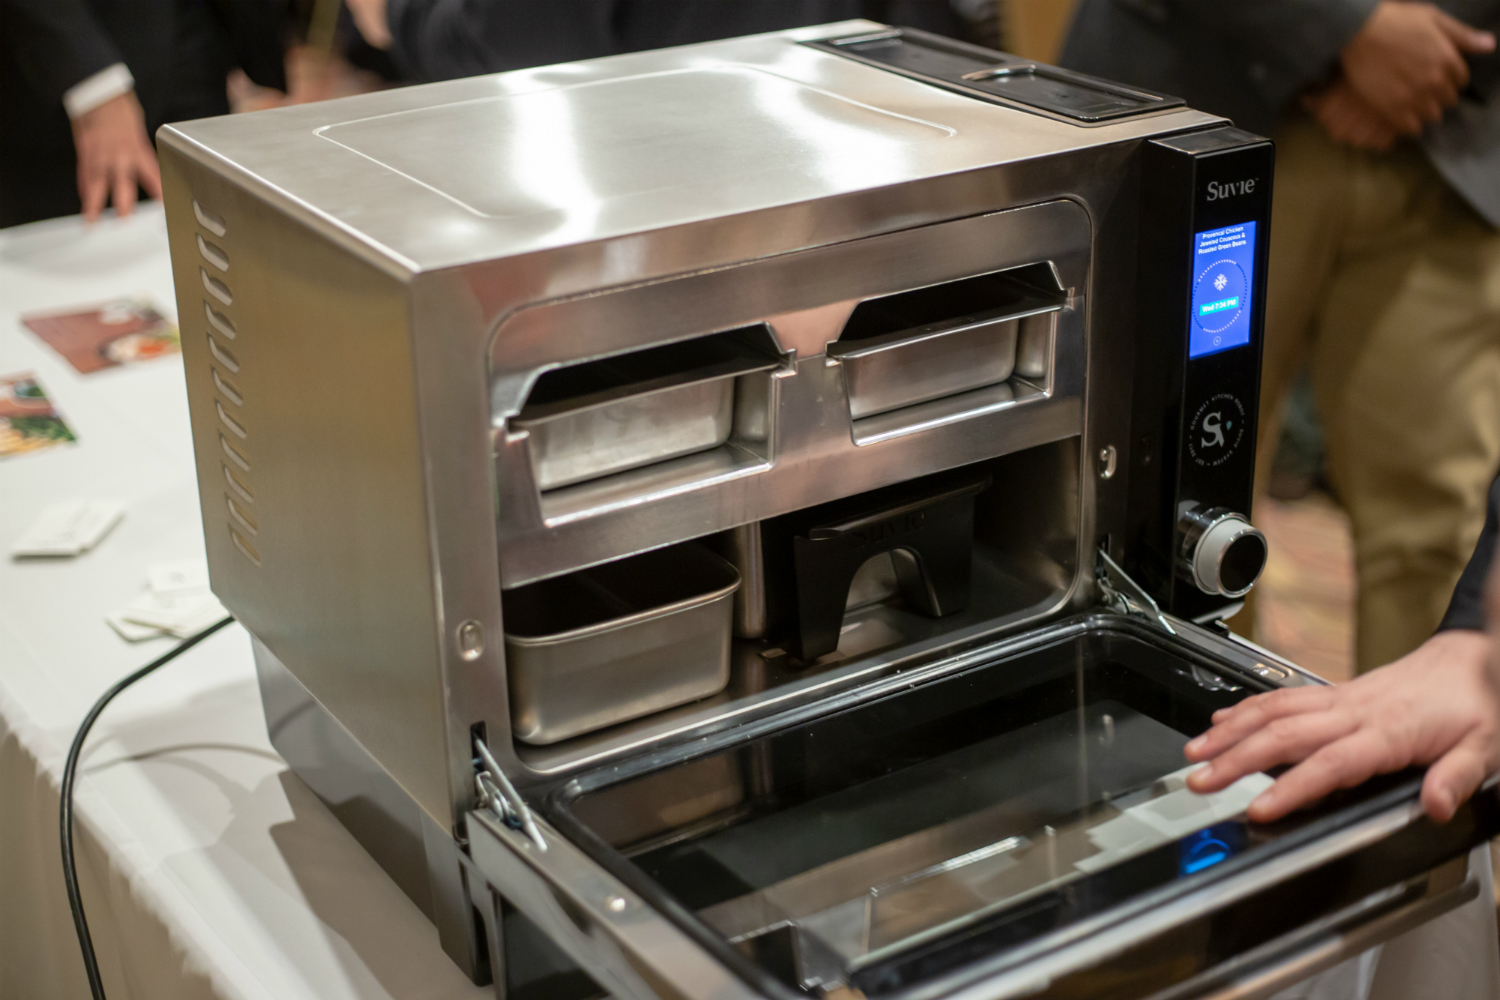 The Suvie Robotic Smart Cooler and Cooker Was at CES 2019